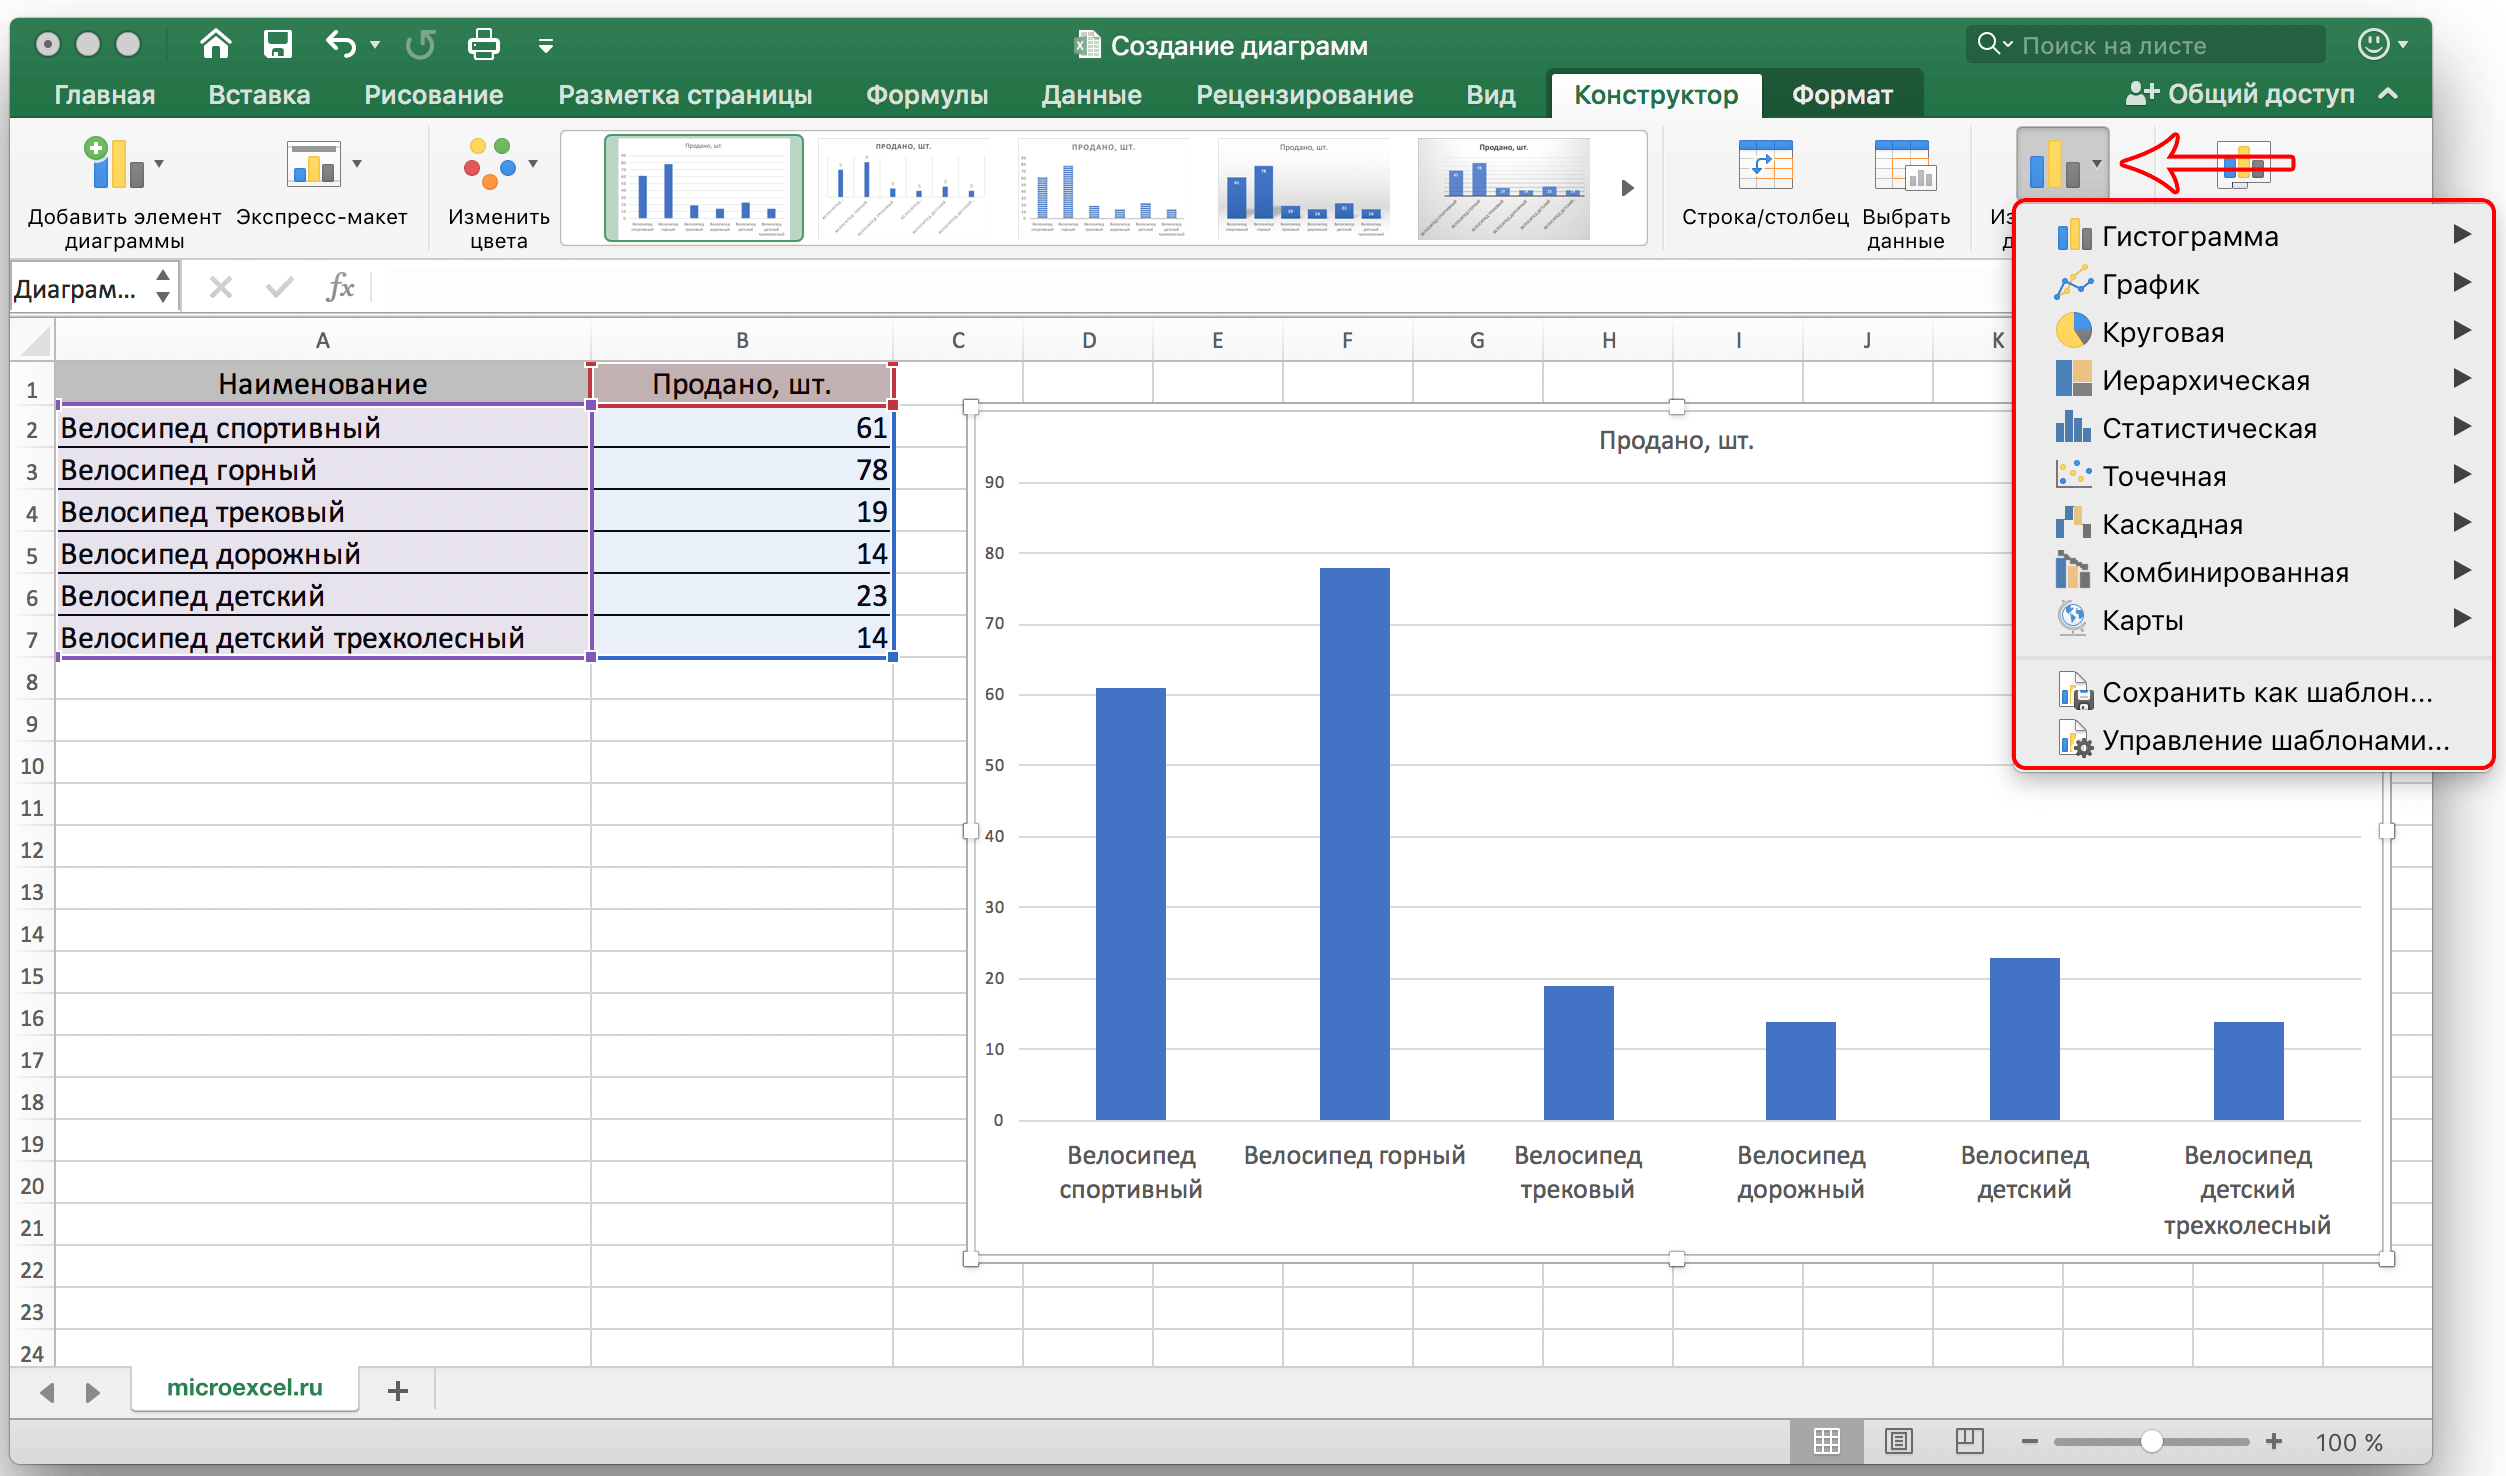 All about creating a chart in Excel. Step by step guide with screenshots